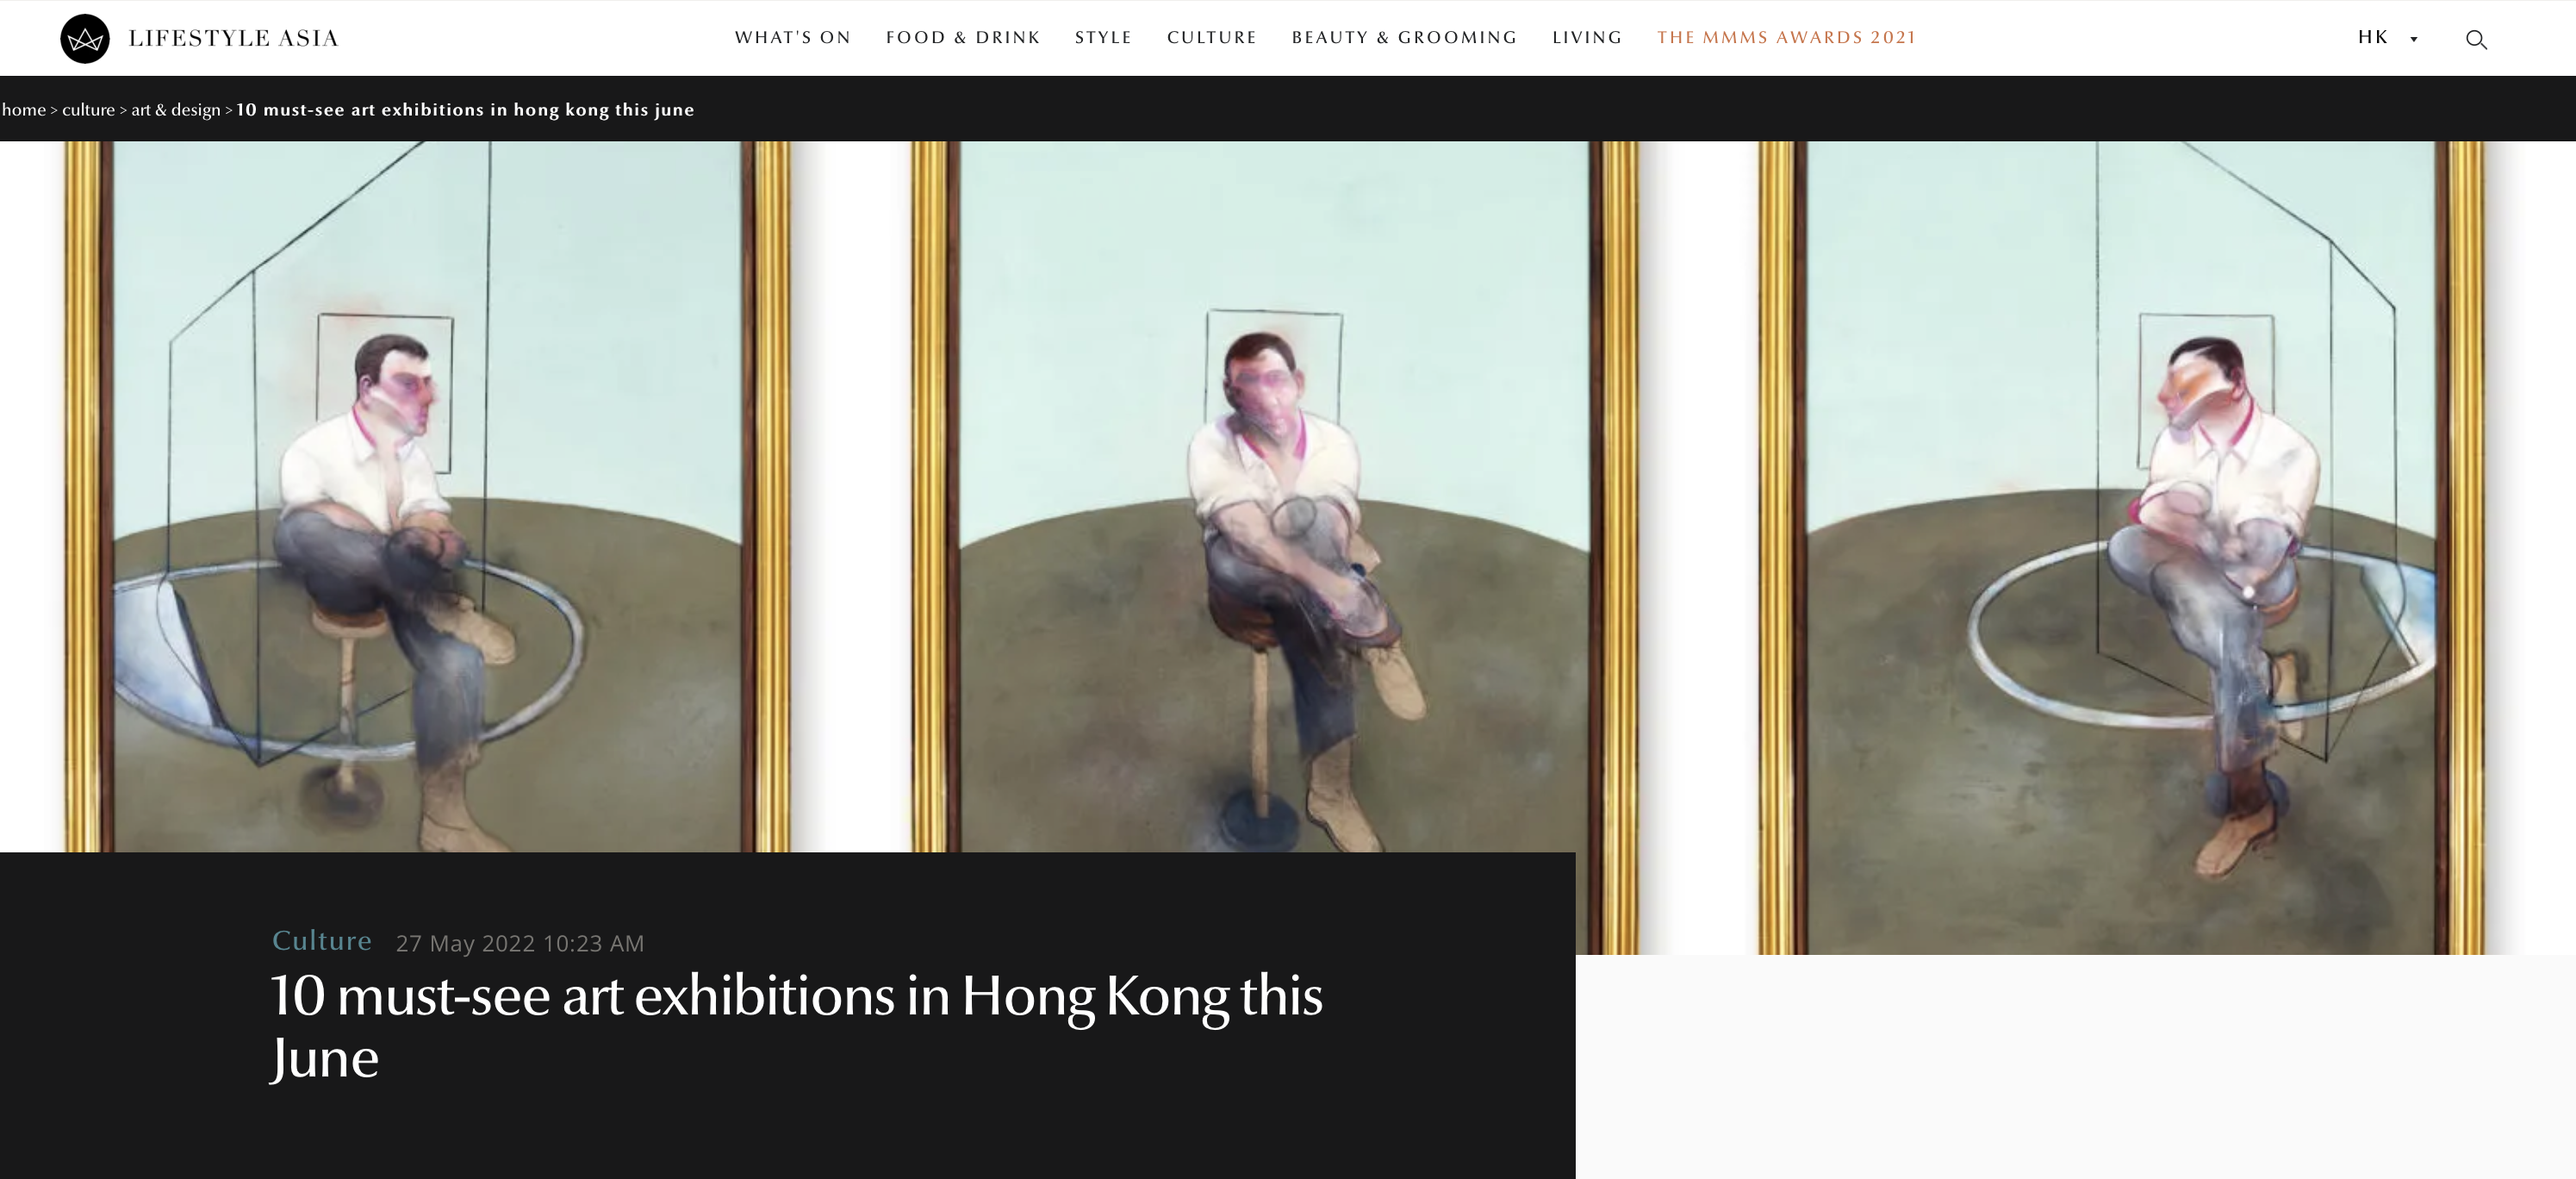 LIFESTYLE ASIA | 10 must-see art exhibitions in Hong Kong this June